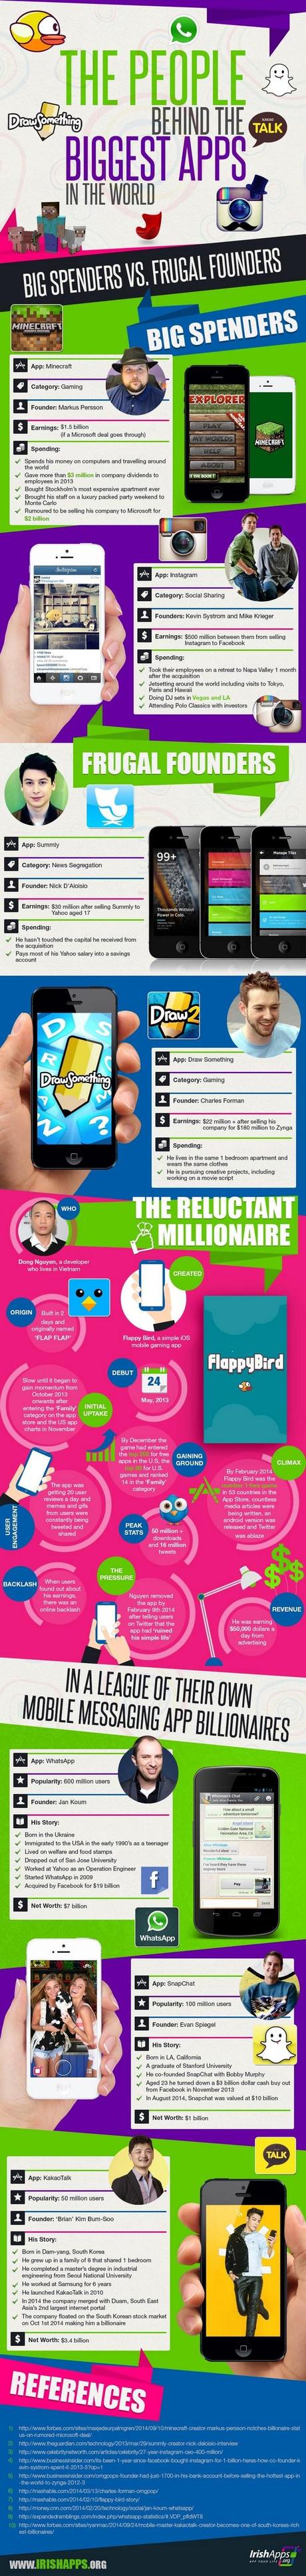 People Behind the Apps-infographic